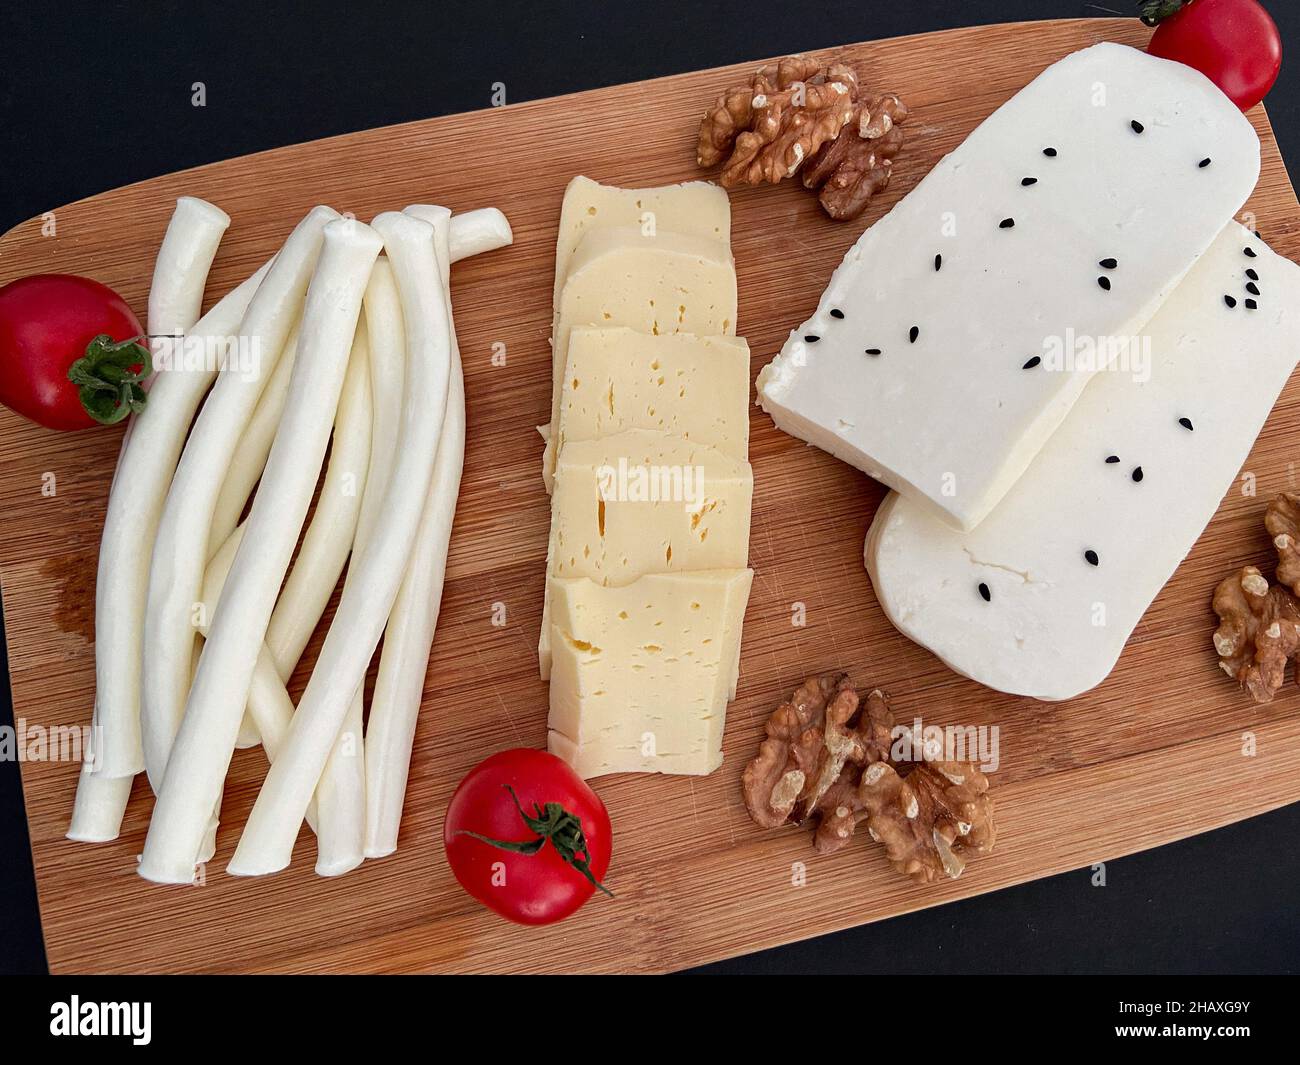 Cheese plate, different cheese types with tomatoes and walnuts. Presentation concept and idea. Stock Photo